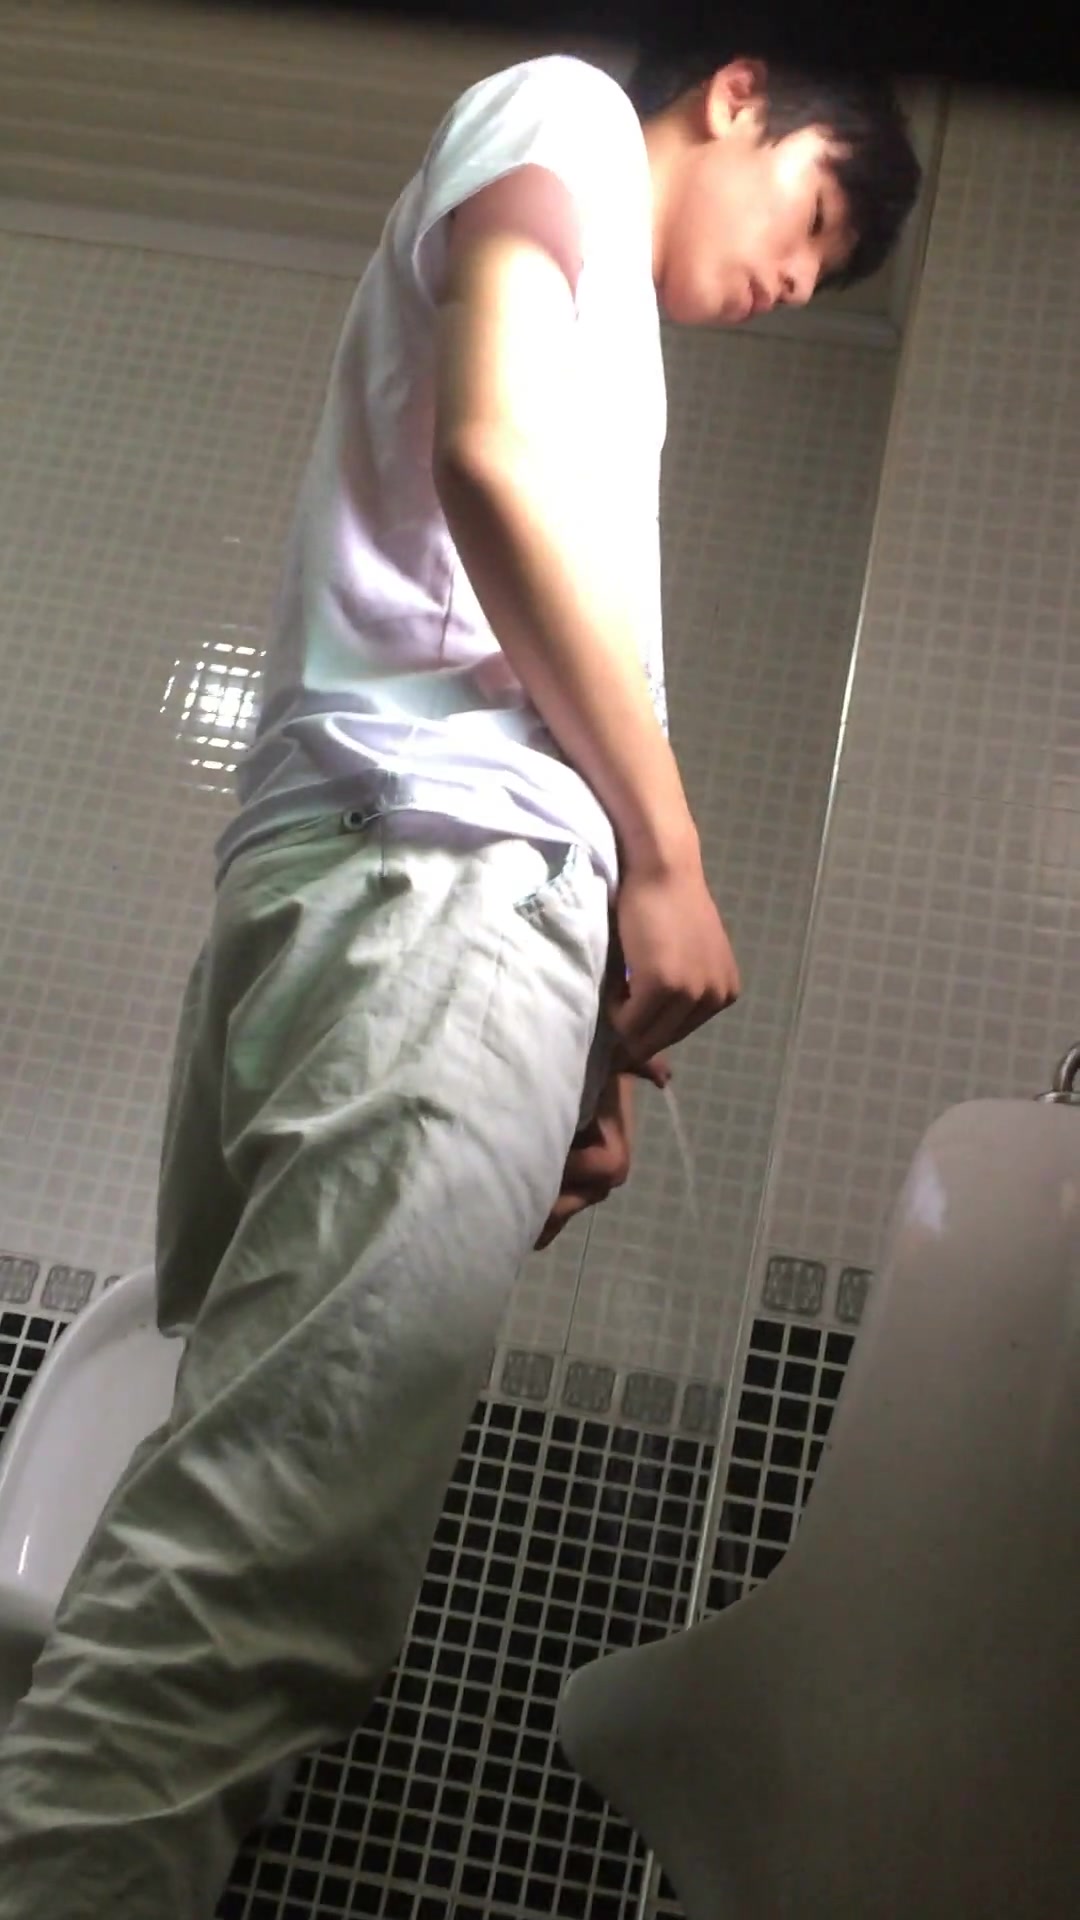 ASIAN BOY PISSING IN THE TOILET